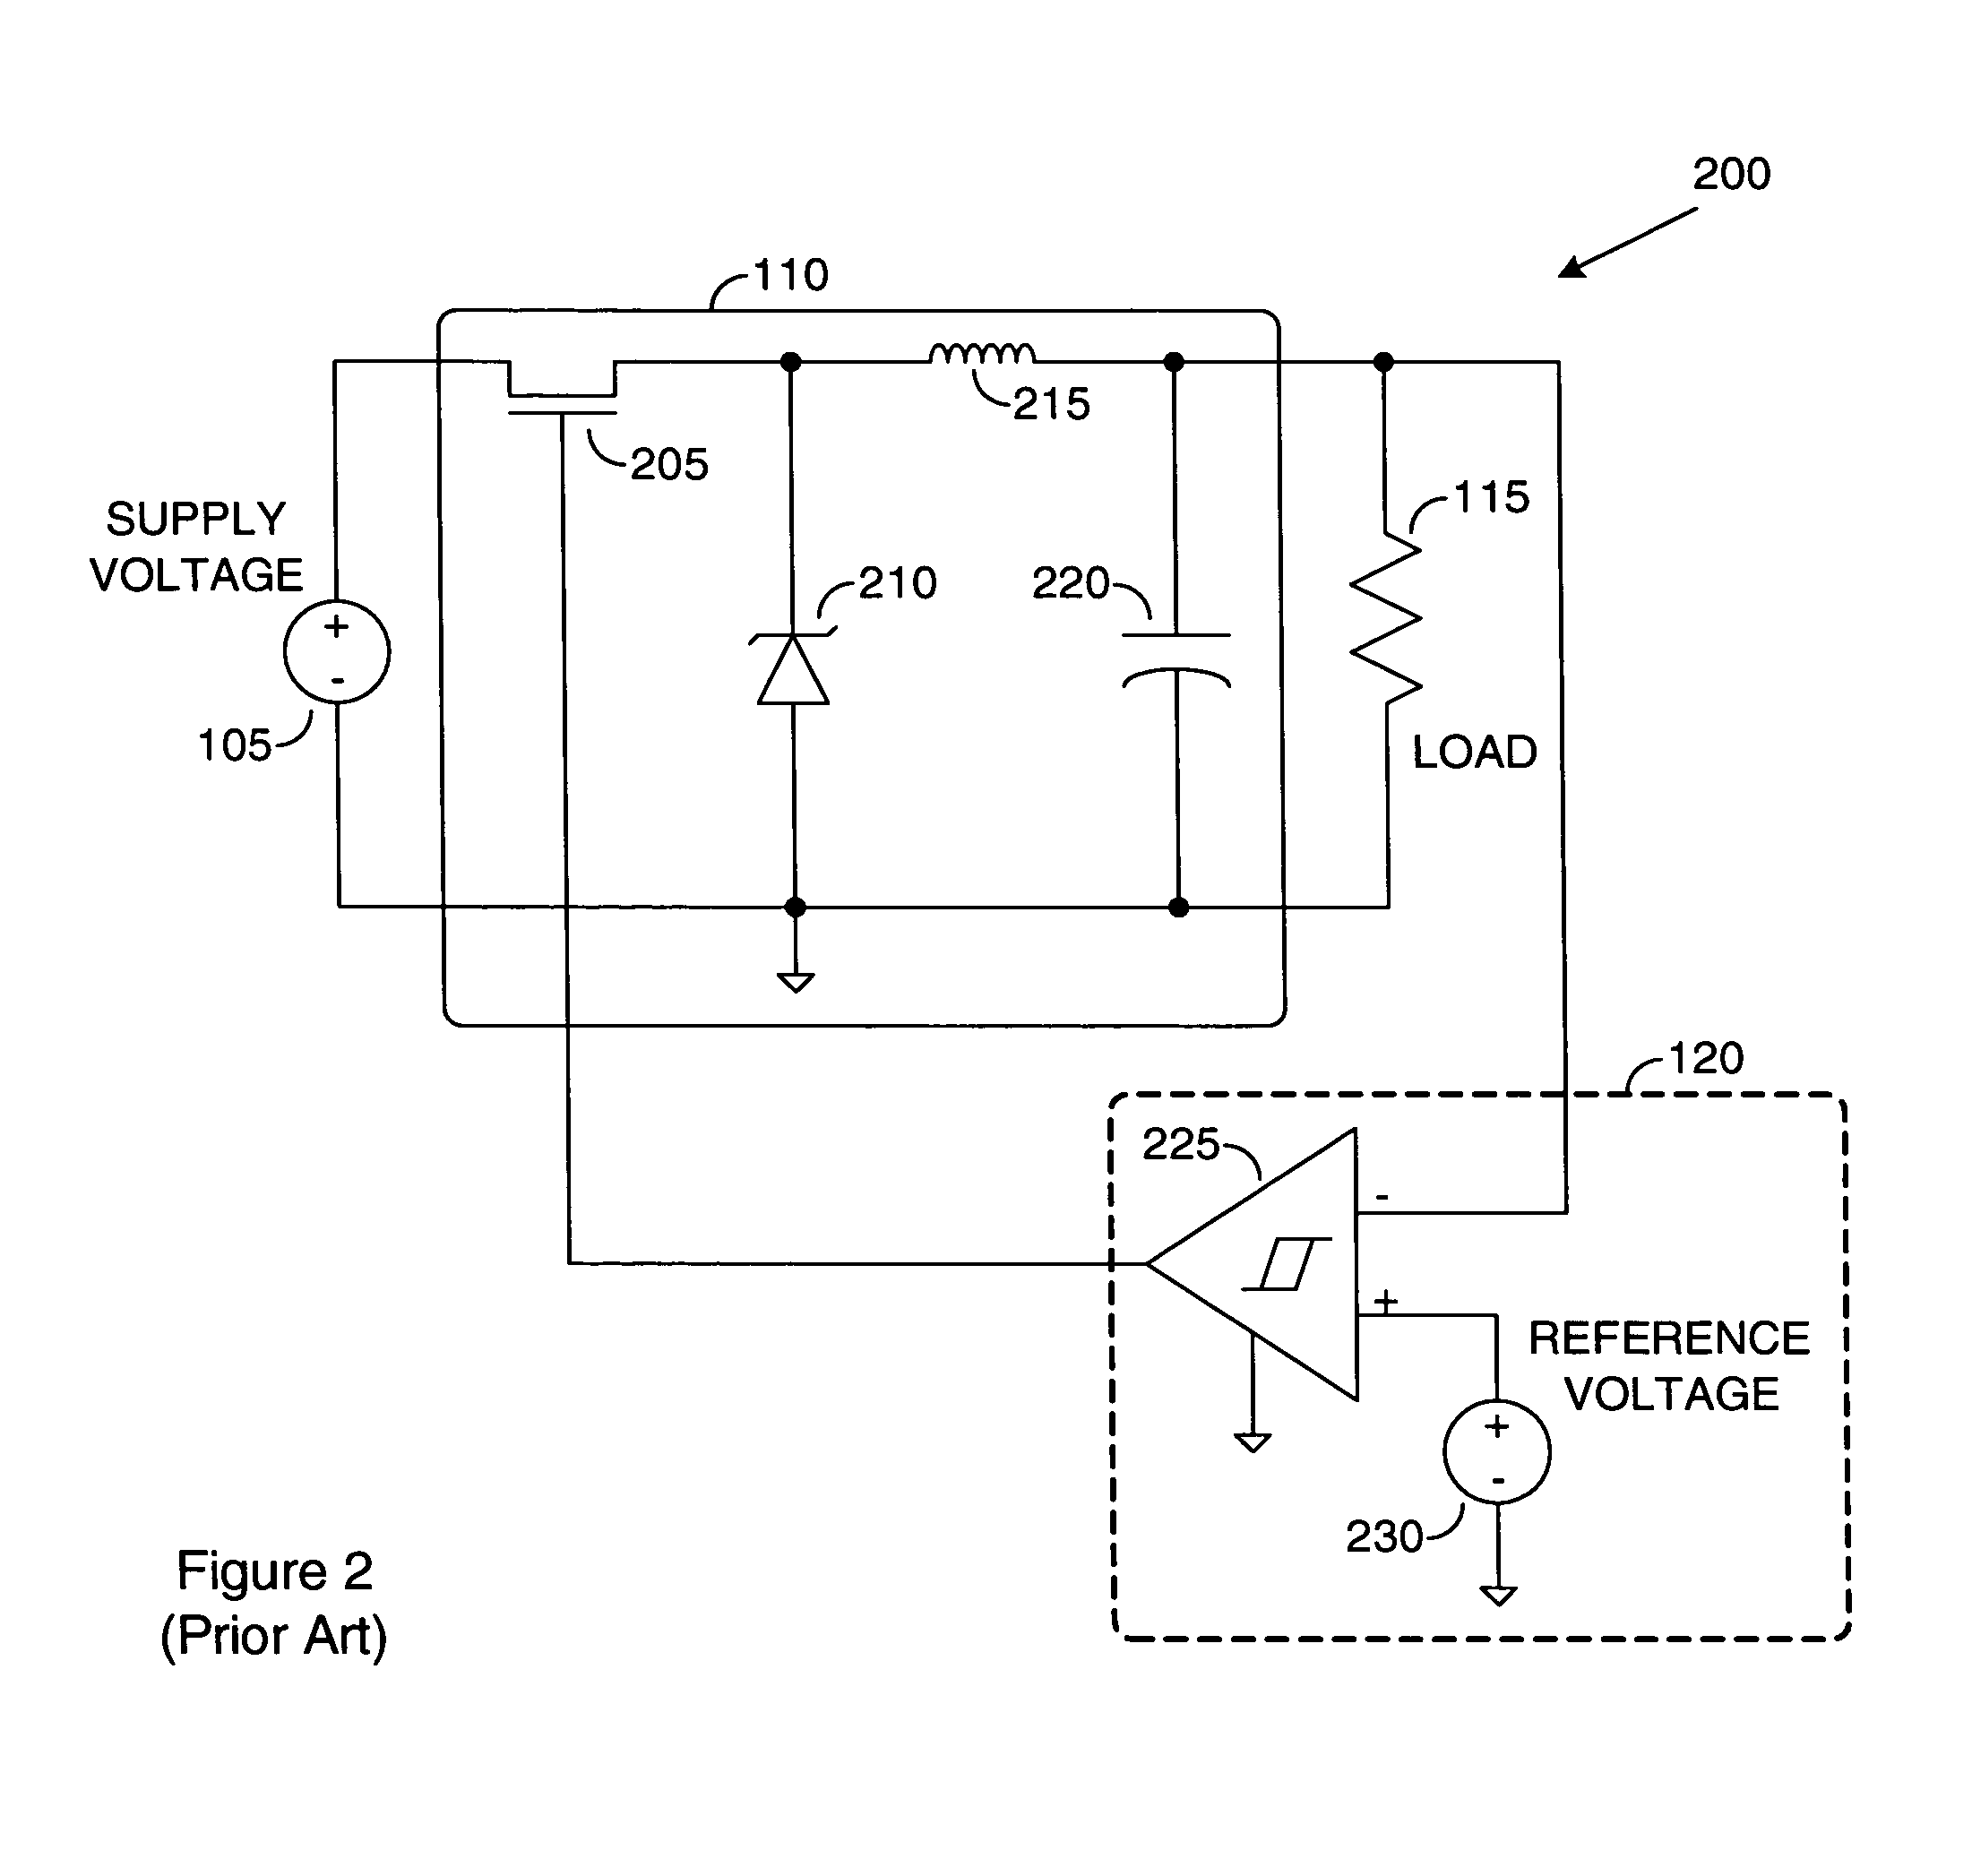 Hysteretic controlled switch regulator with fixed off time